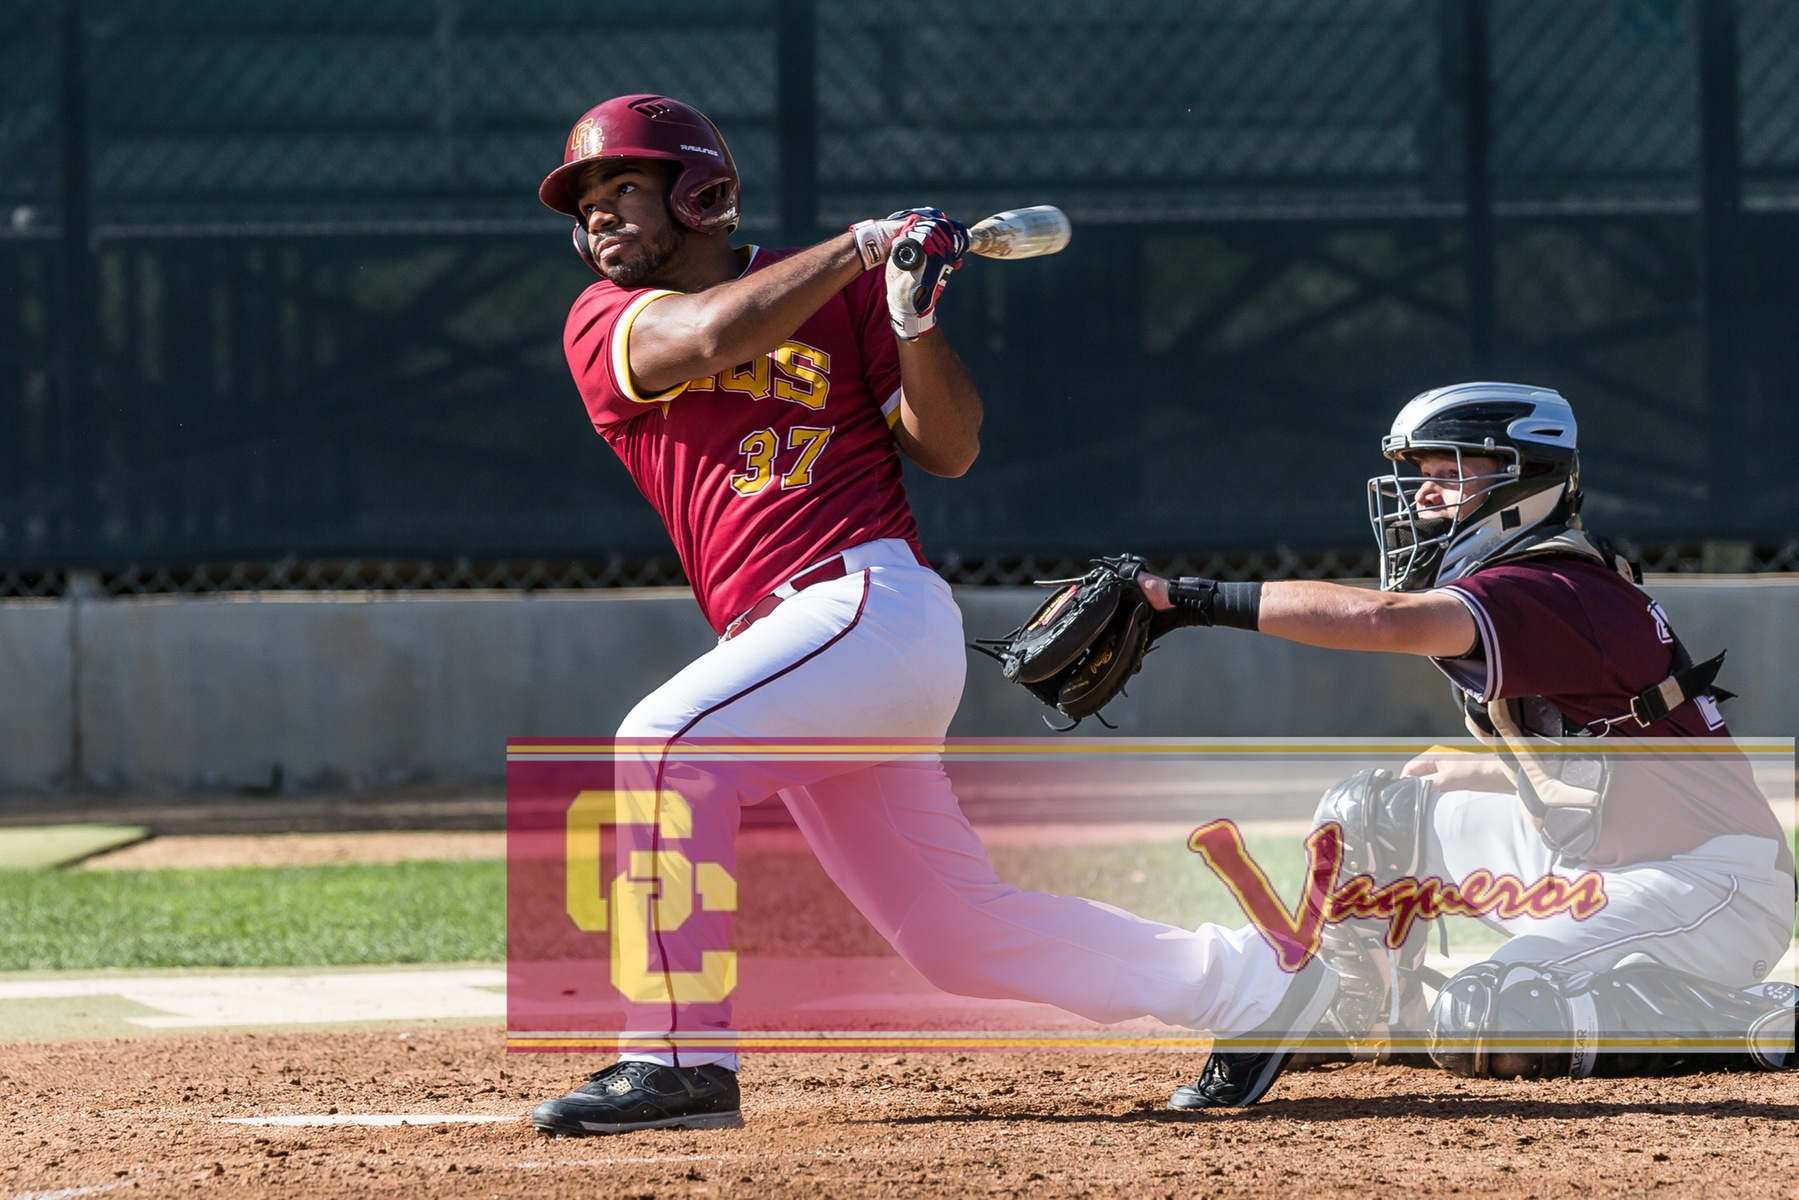 Thad Wilson had four hits in 9-5 Glendale win over Mt. SAC